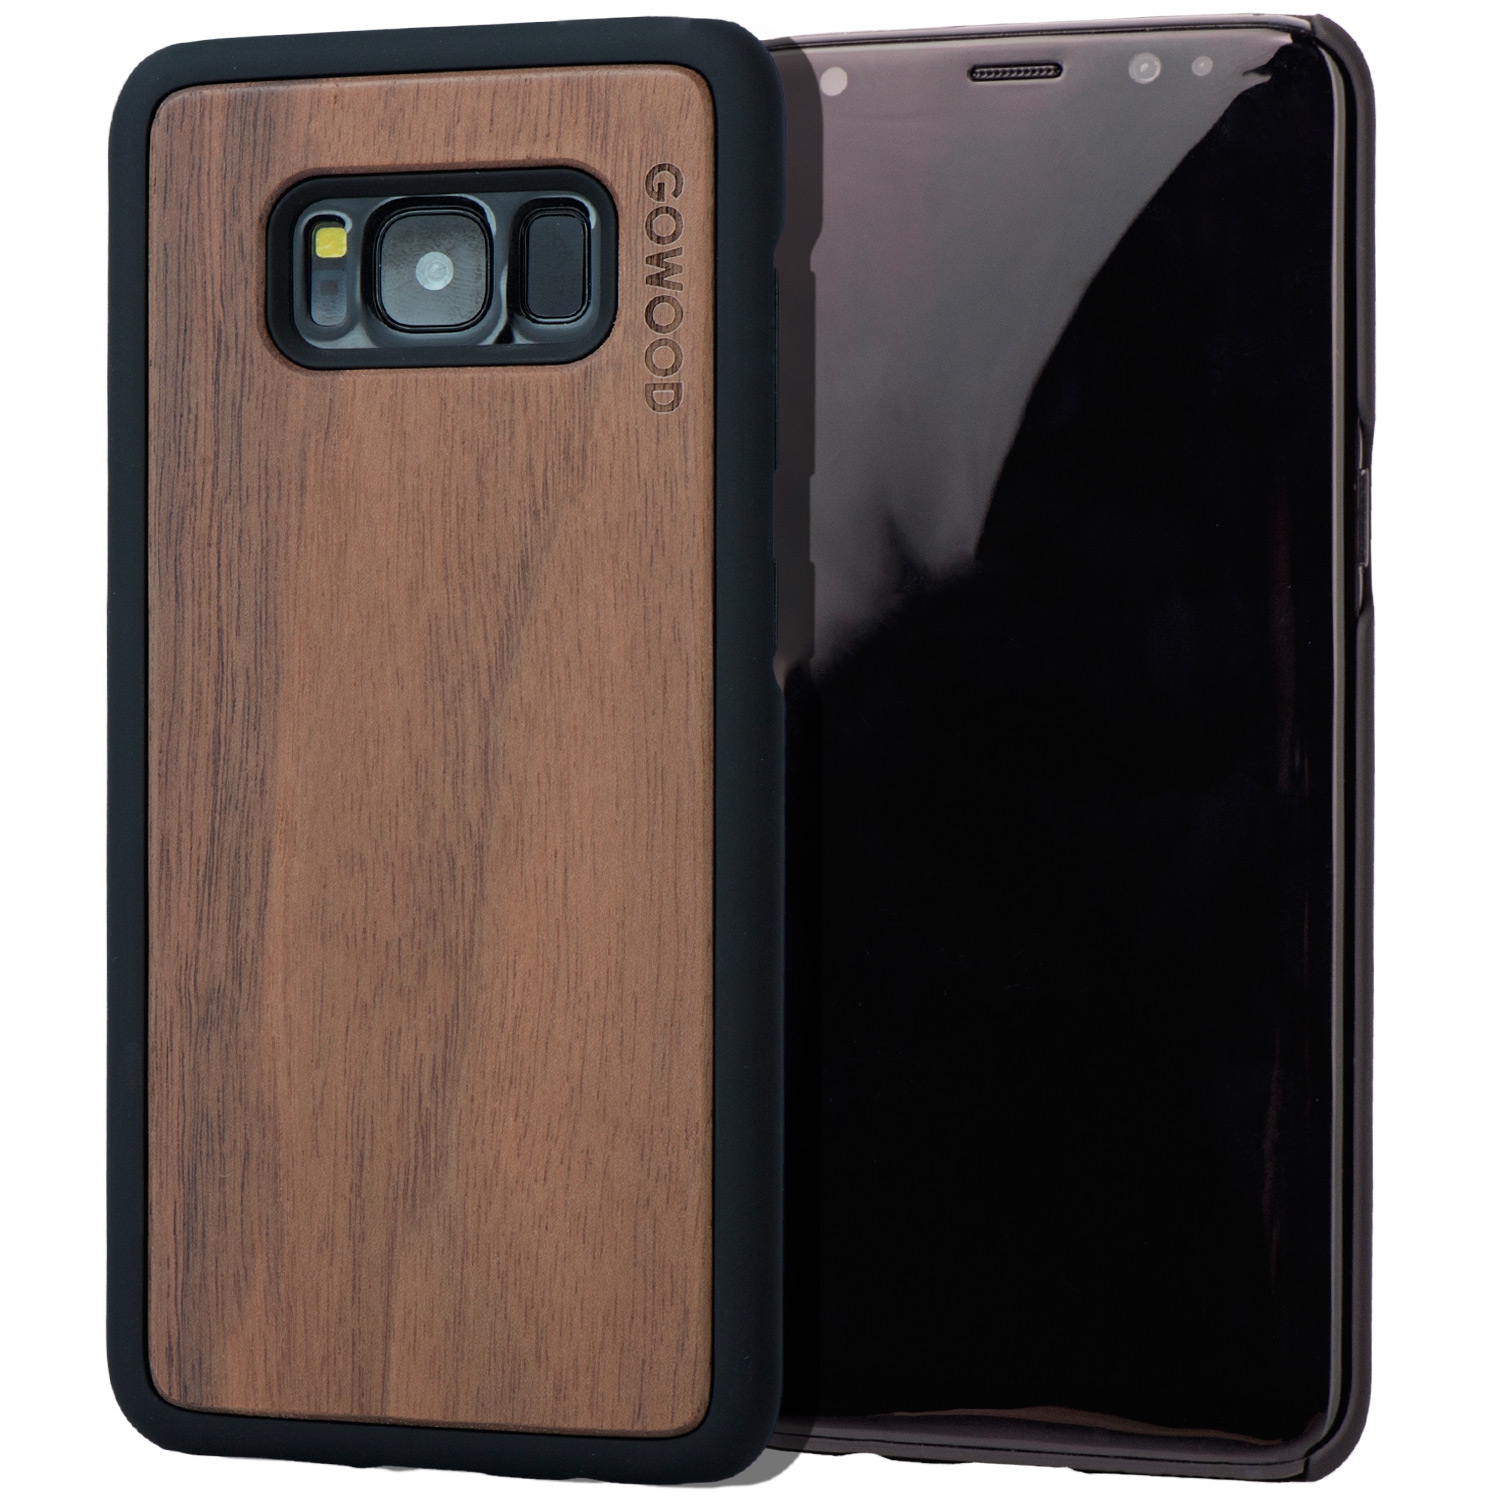 Samsung Galaxy S8 Wood Case | Real Walnut Backside and Durable Polycarbonate Shockproof Bumper with Rubber Coating